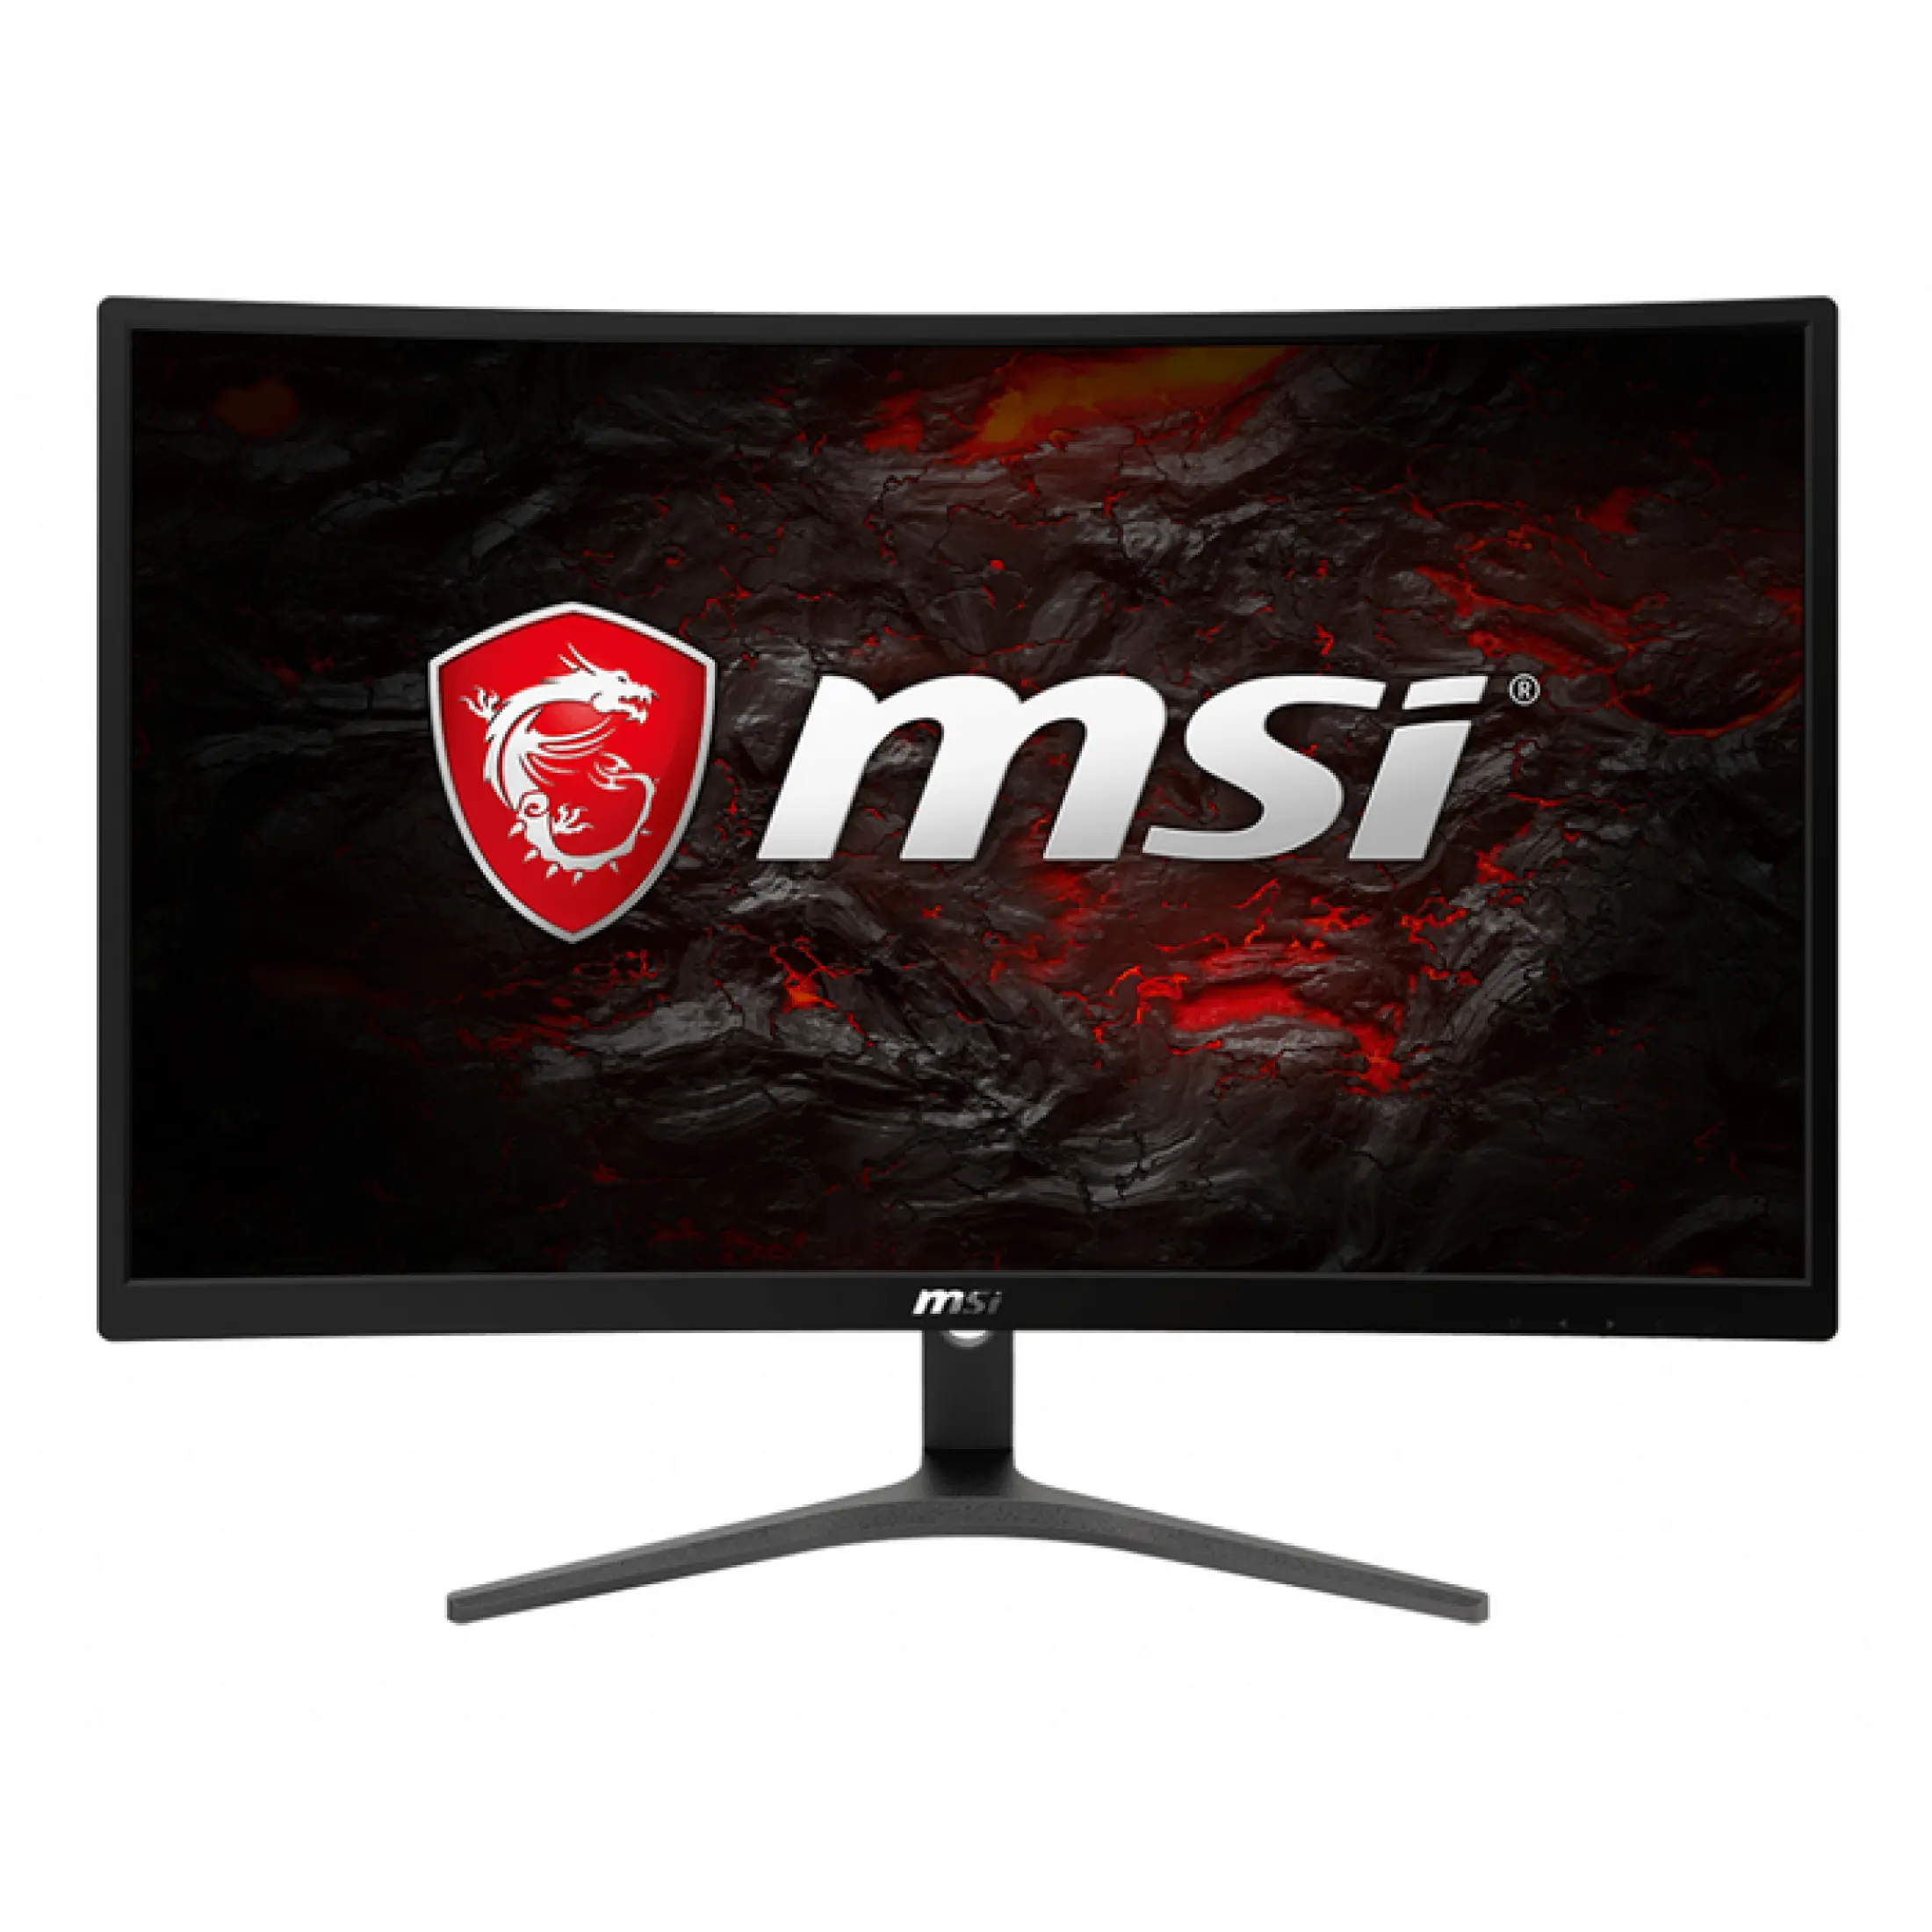 Msi Optix G241vc 24 Curved Gaming Monitor 1080p Fhd 75hz 1ms Lazada Indonesia